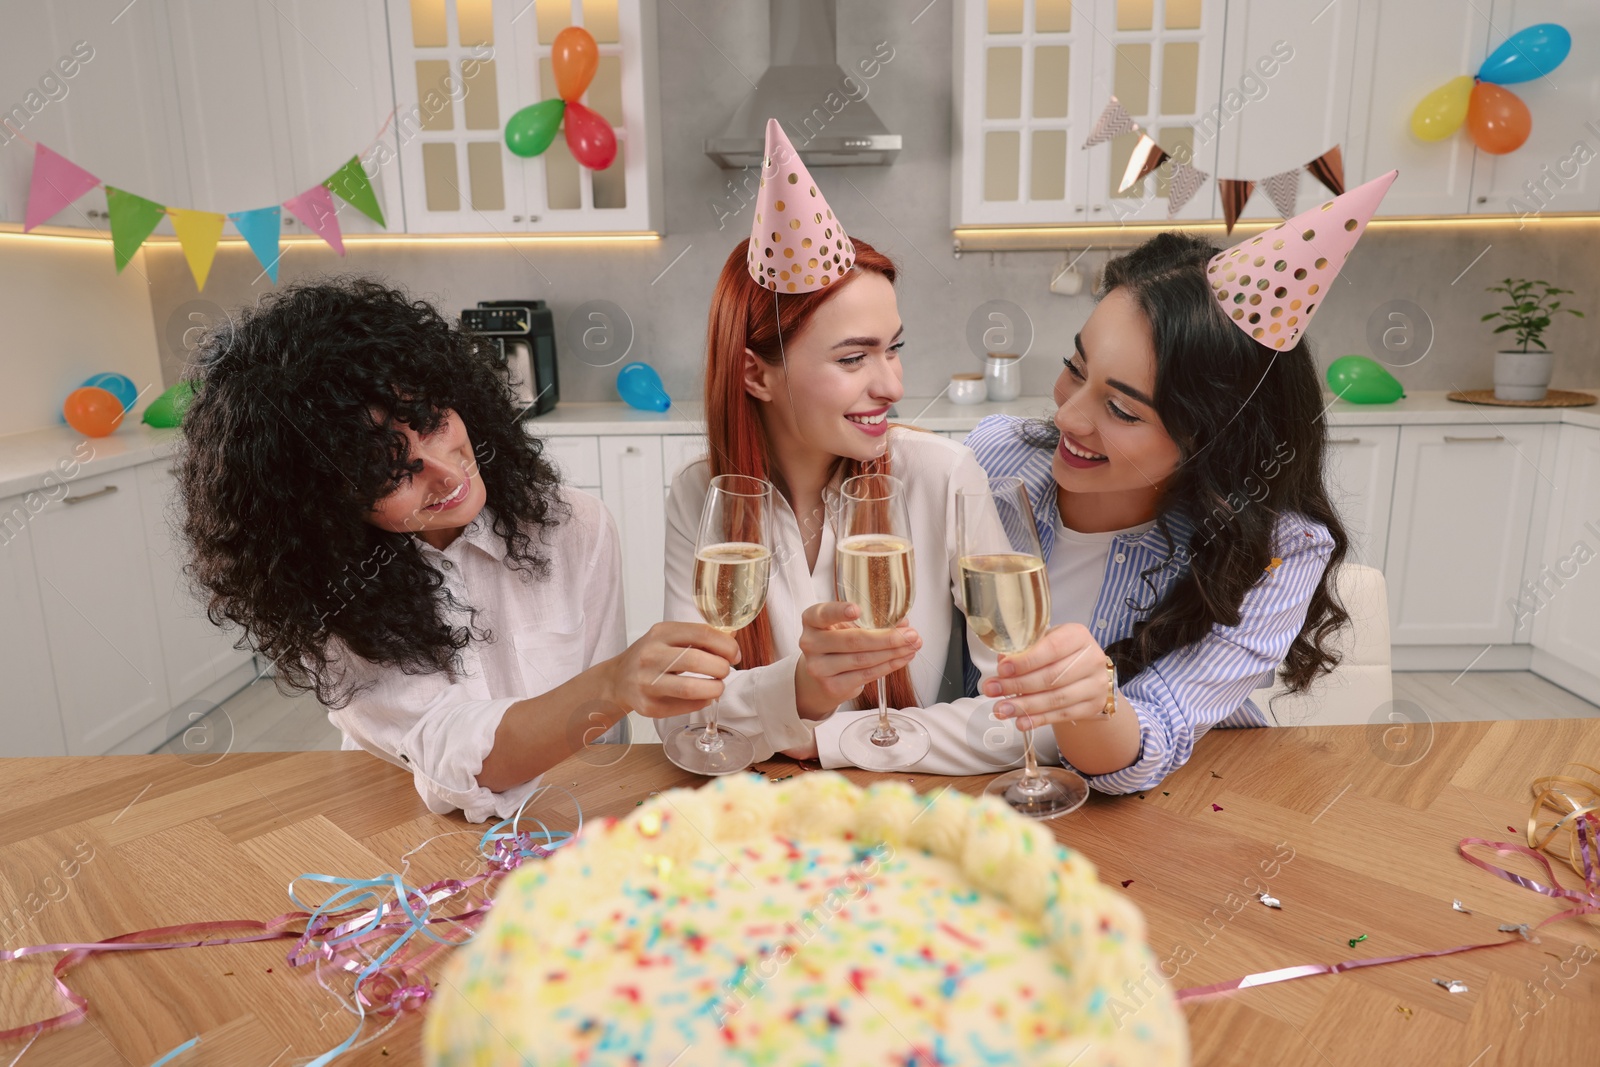 Photo of Happy young women with tasty cake and glasses of sparkling wine celebrating birthday in kitchen